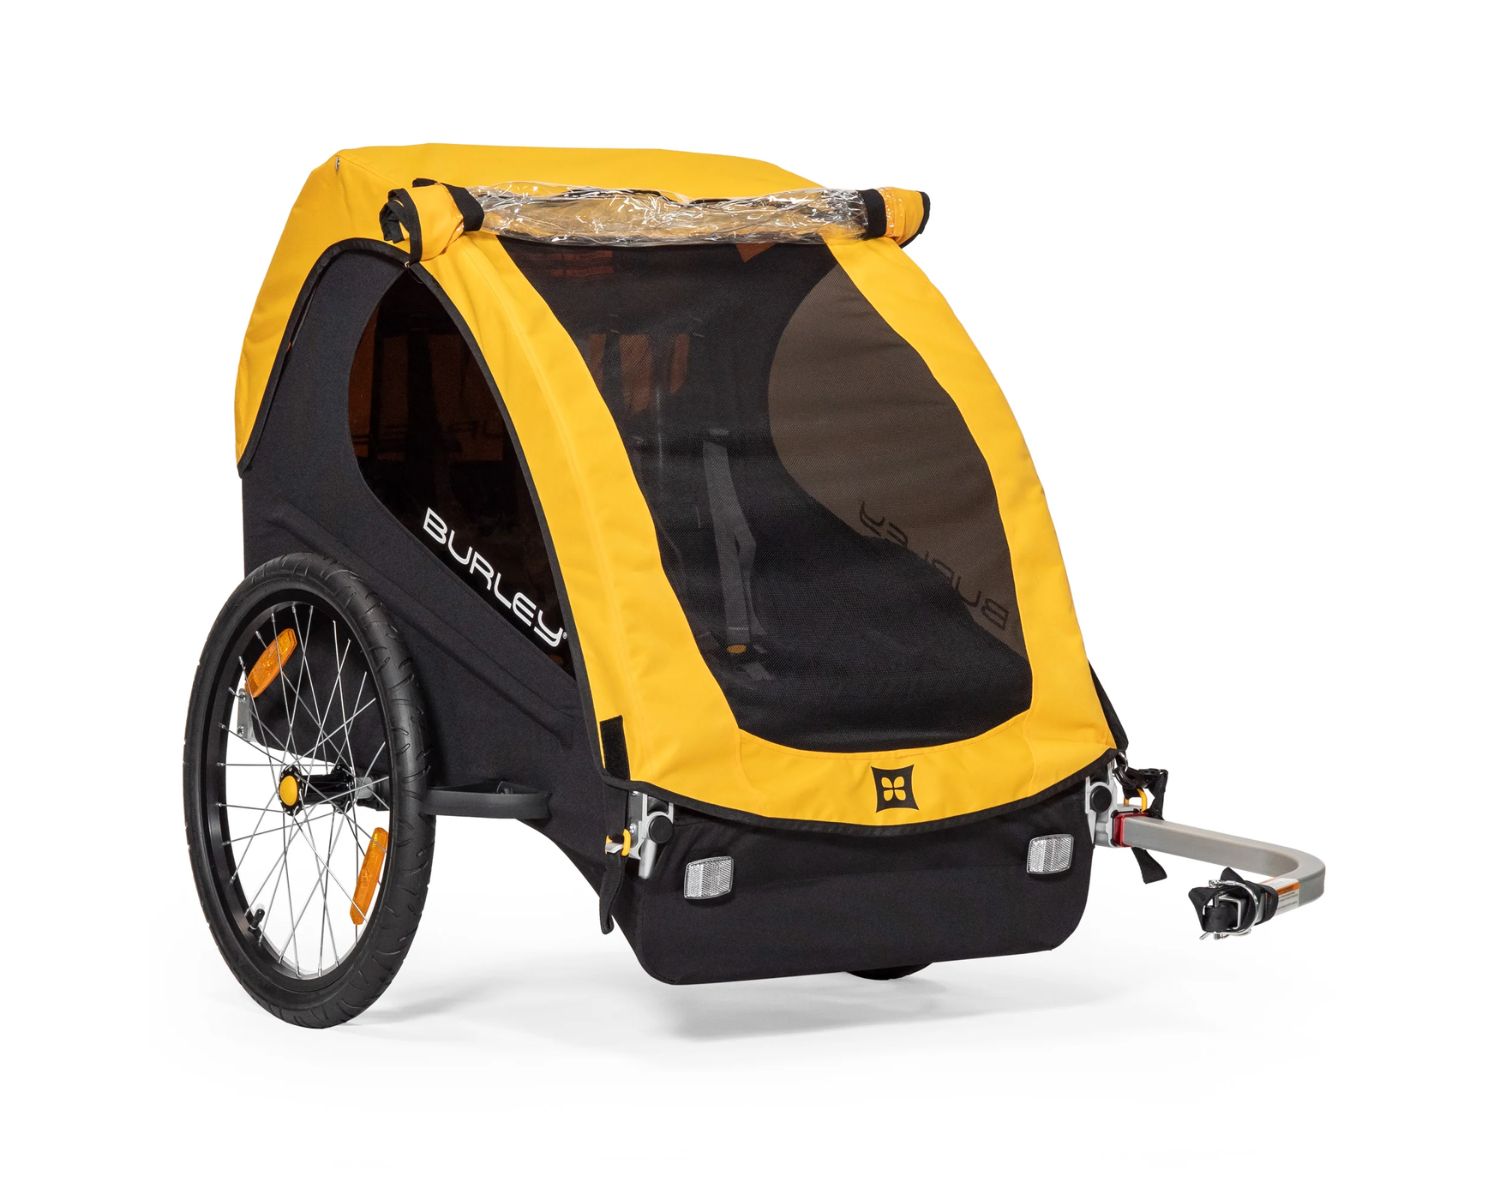 18-extraordinary-facts-about-burley-bike-trailer